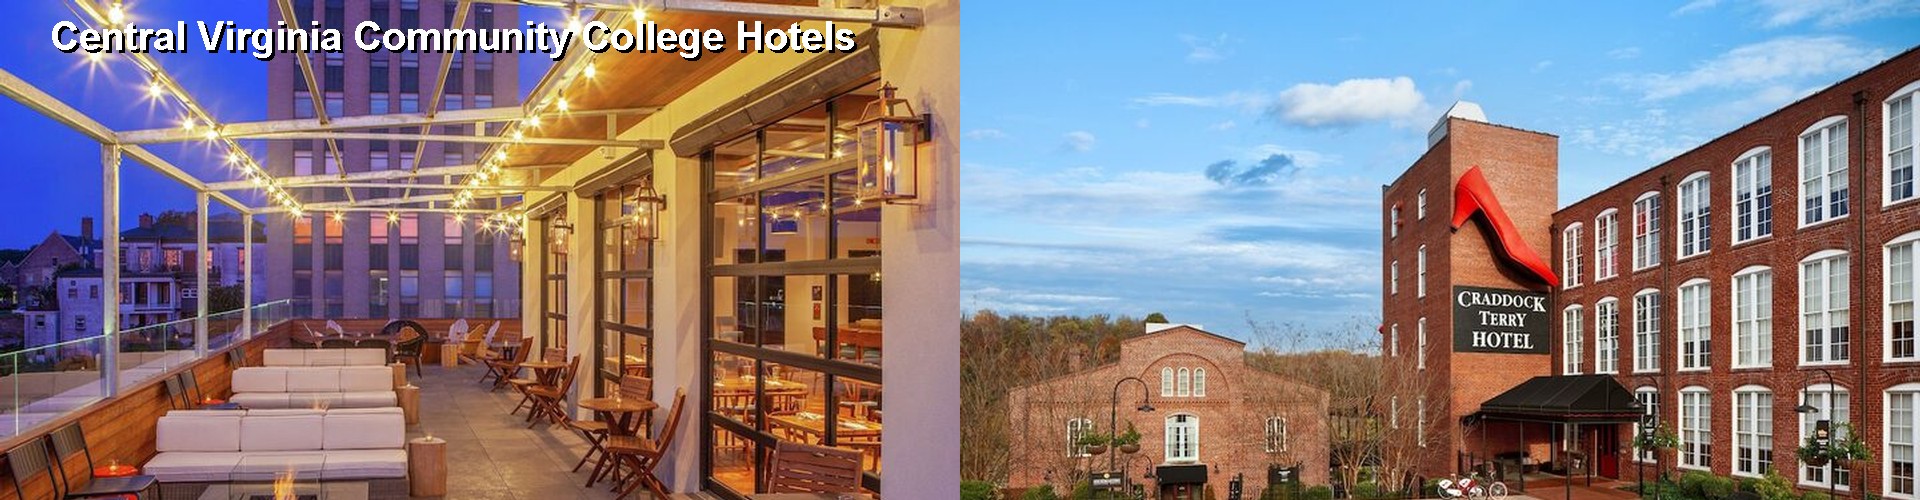 5 Best Hotels near Central Virginia Community College